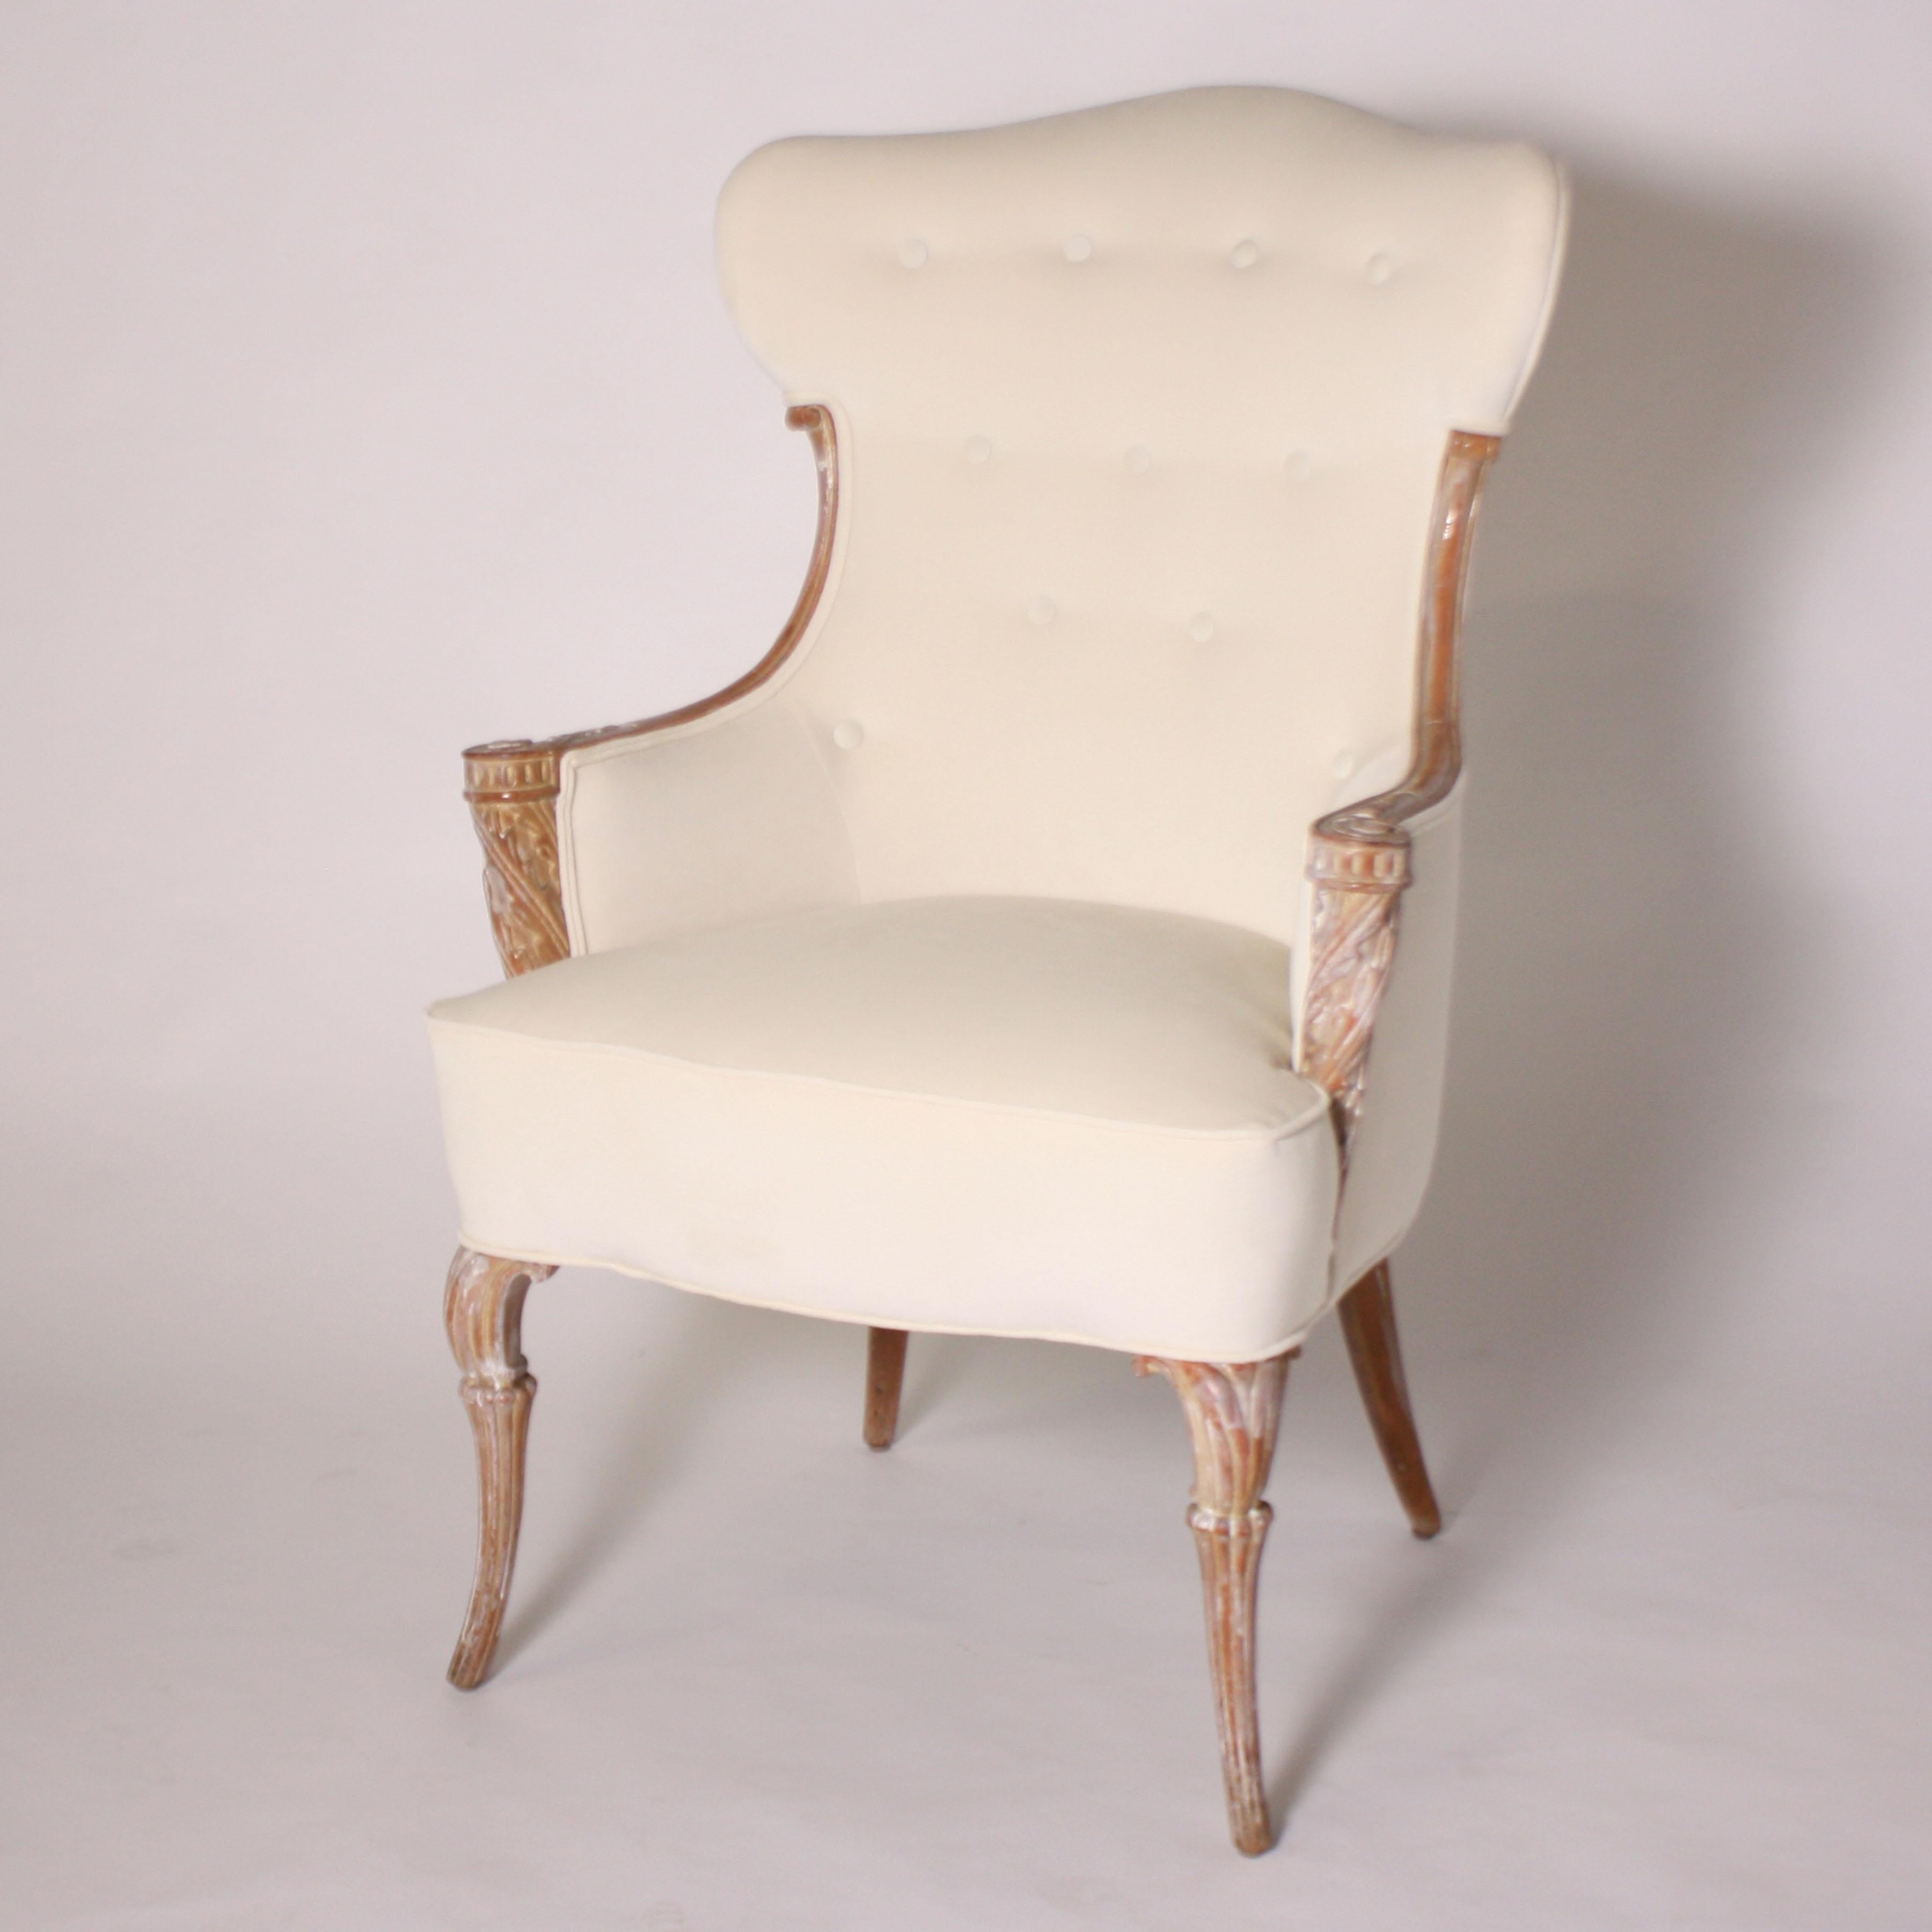 Pair of tufted chairs, circa 1940.